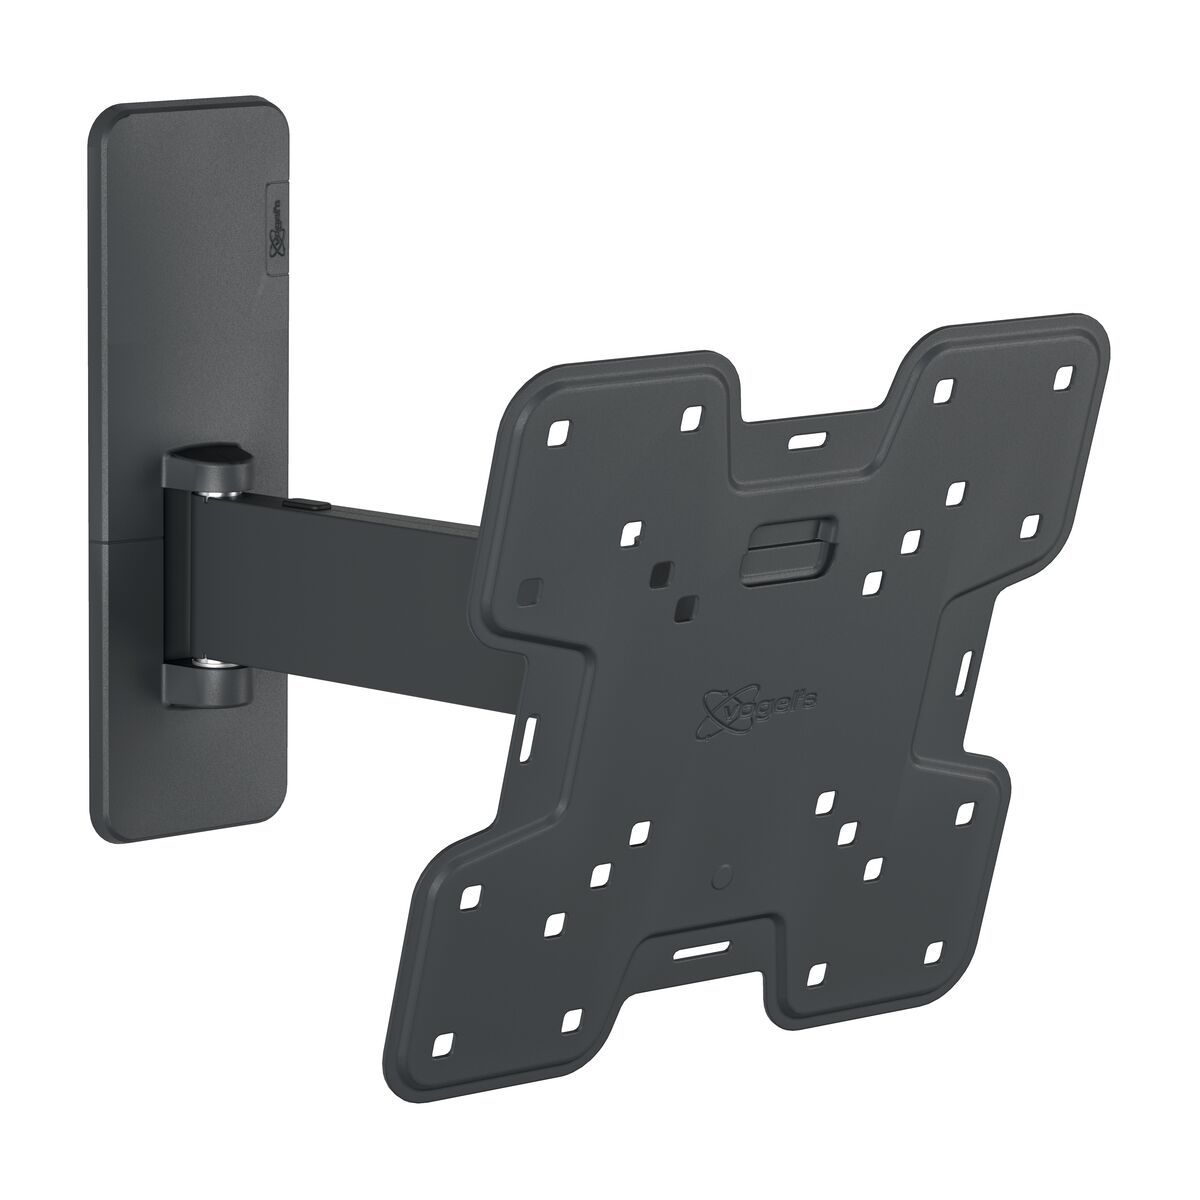 Vogel's TVM 1225 Full-Motion TV Wall Mount - Suitable for 19 up to 43 inch TVs - Up to 120° swivel - Tilt up to 15° - Product